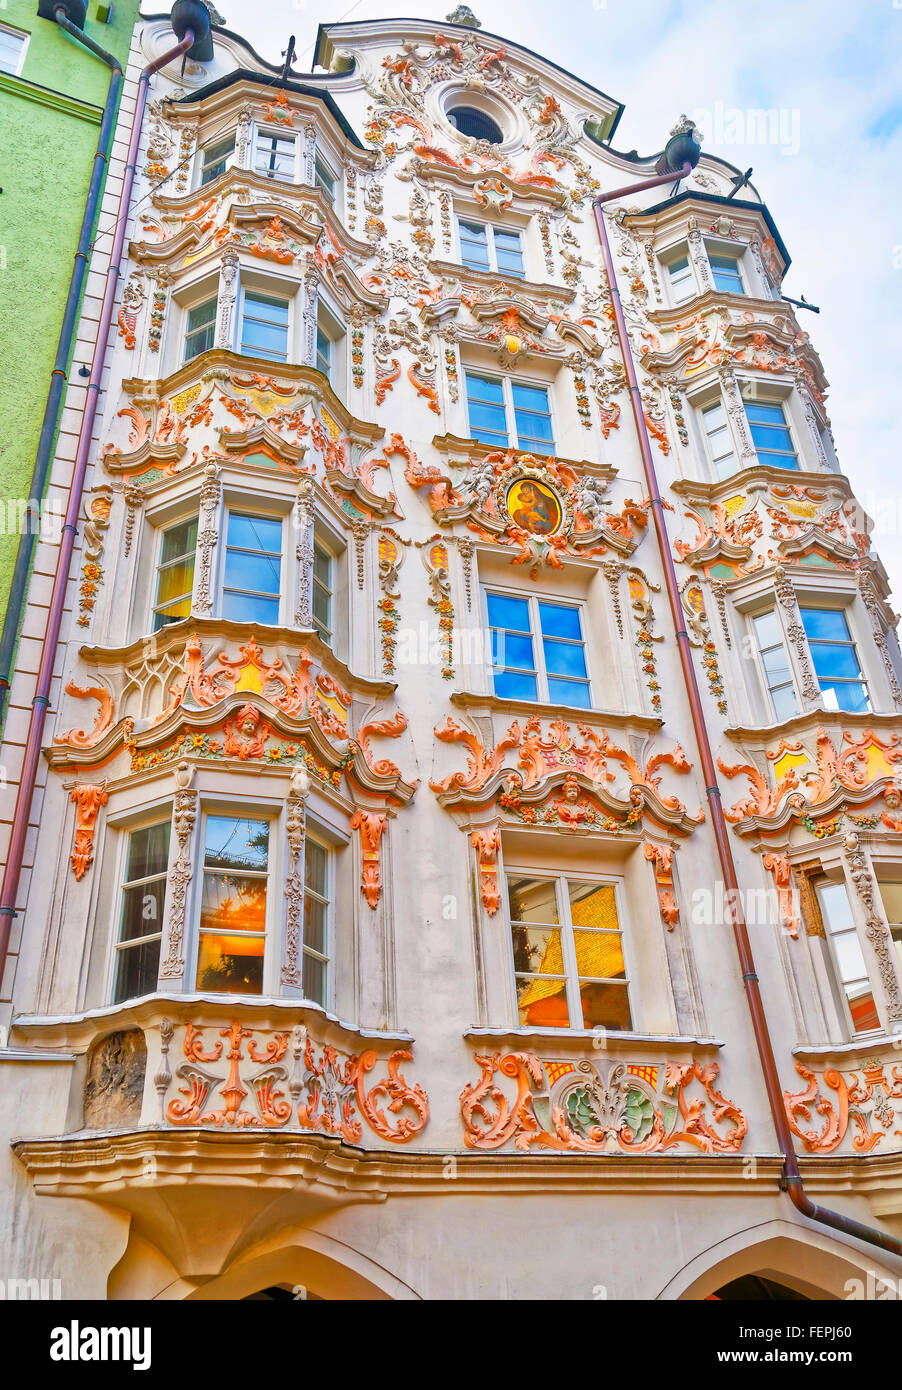 INNSBRUCK, AUSTRIA - JANUARY 4, 2010: Helblinghaus called as House of Helbling with Baroque style facade in Innsbruck of Austria. Ornamental facade is decorated with sculpture and decorative elements Stock Photo